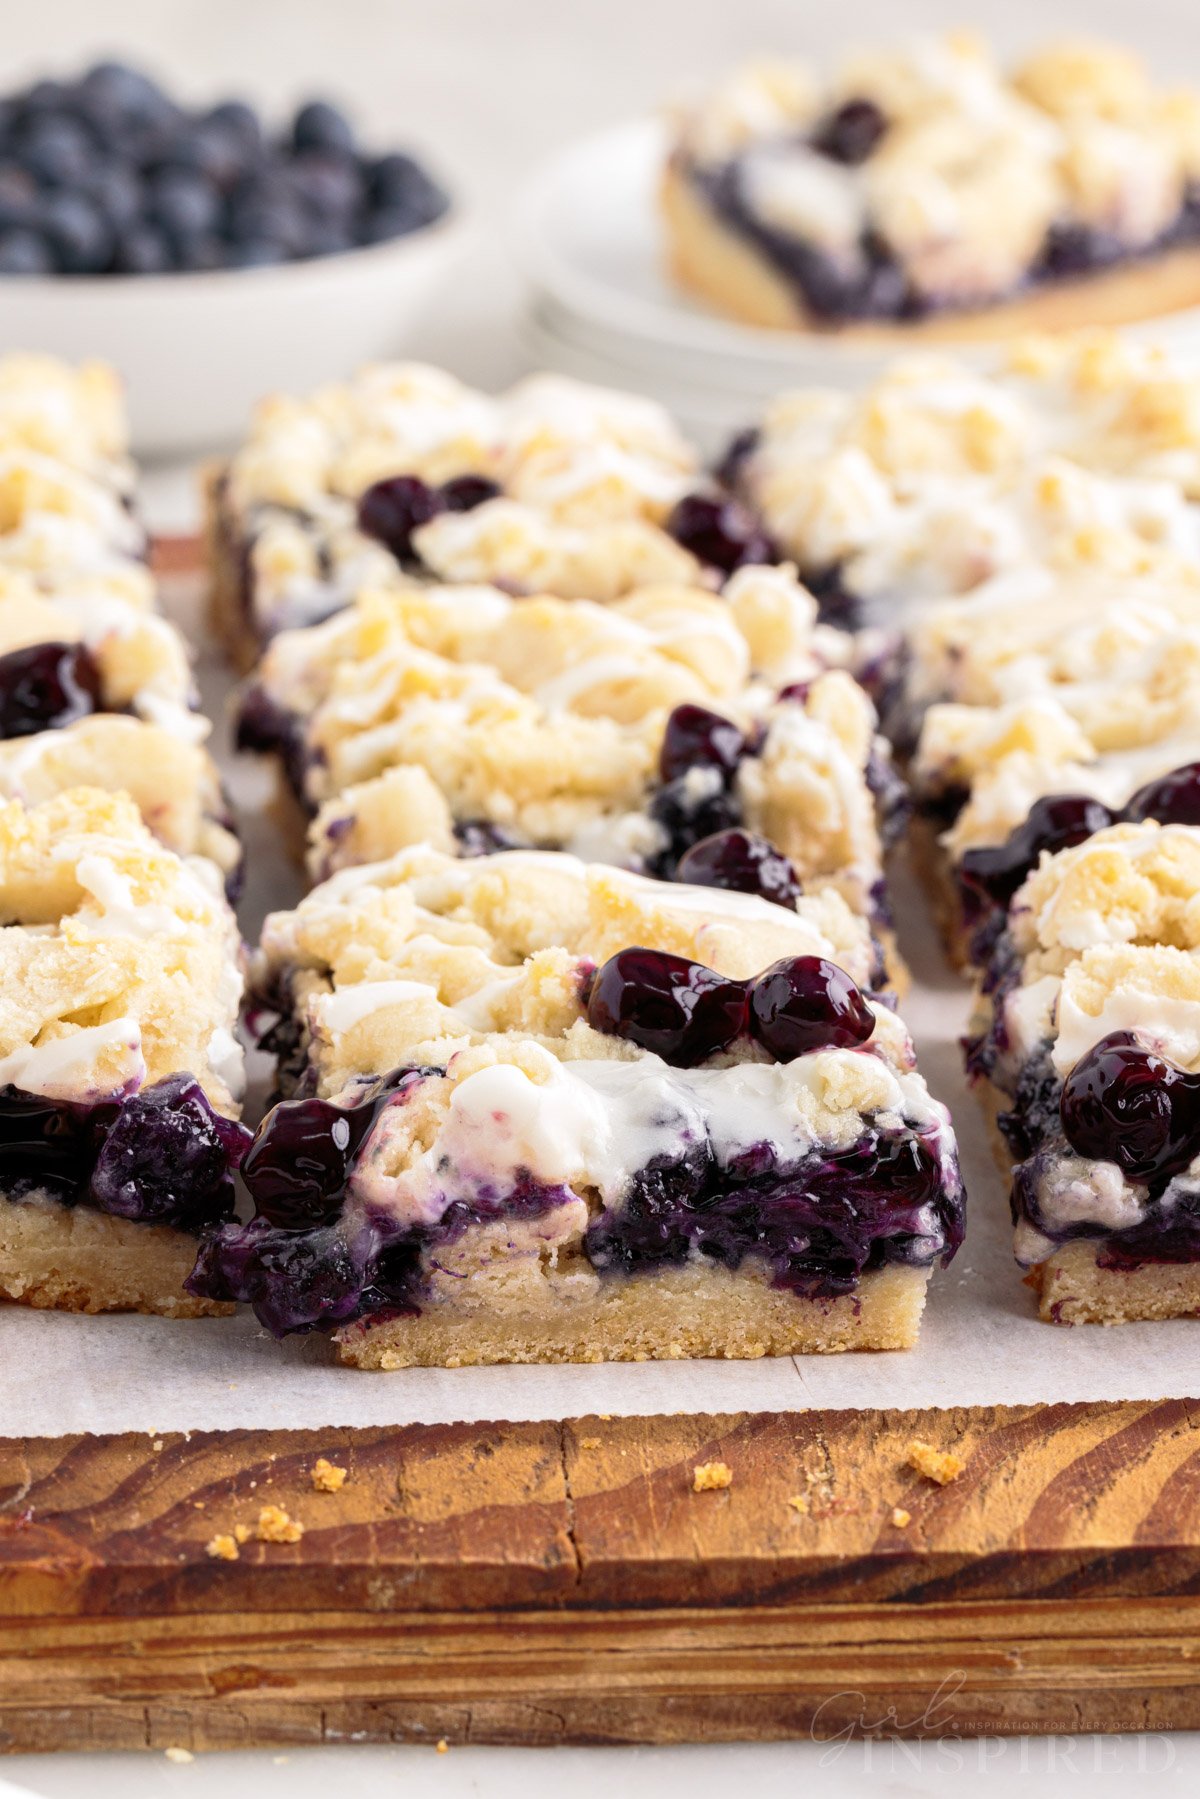 Blueberry pie bars cut into squares on wooden cutting board.